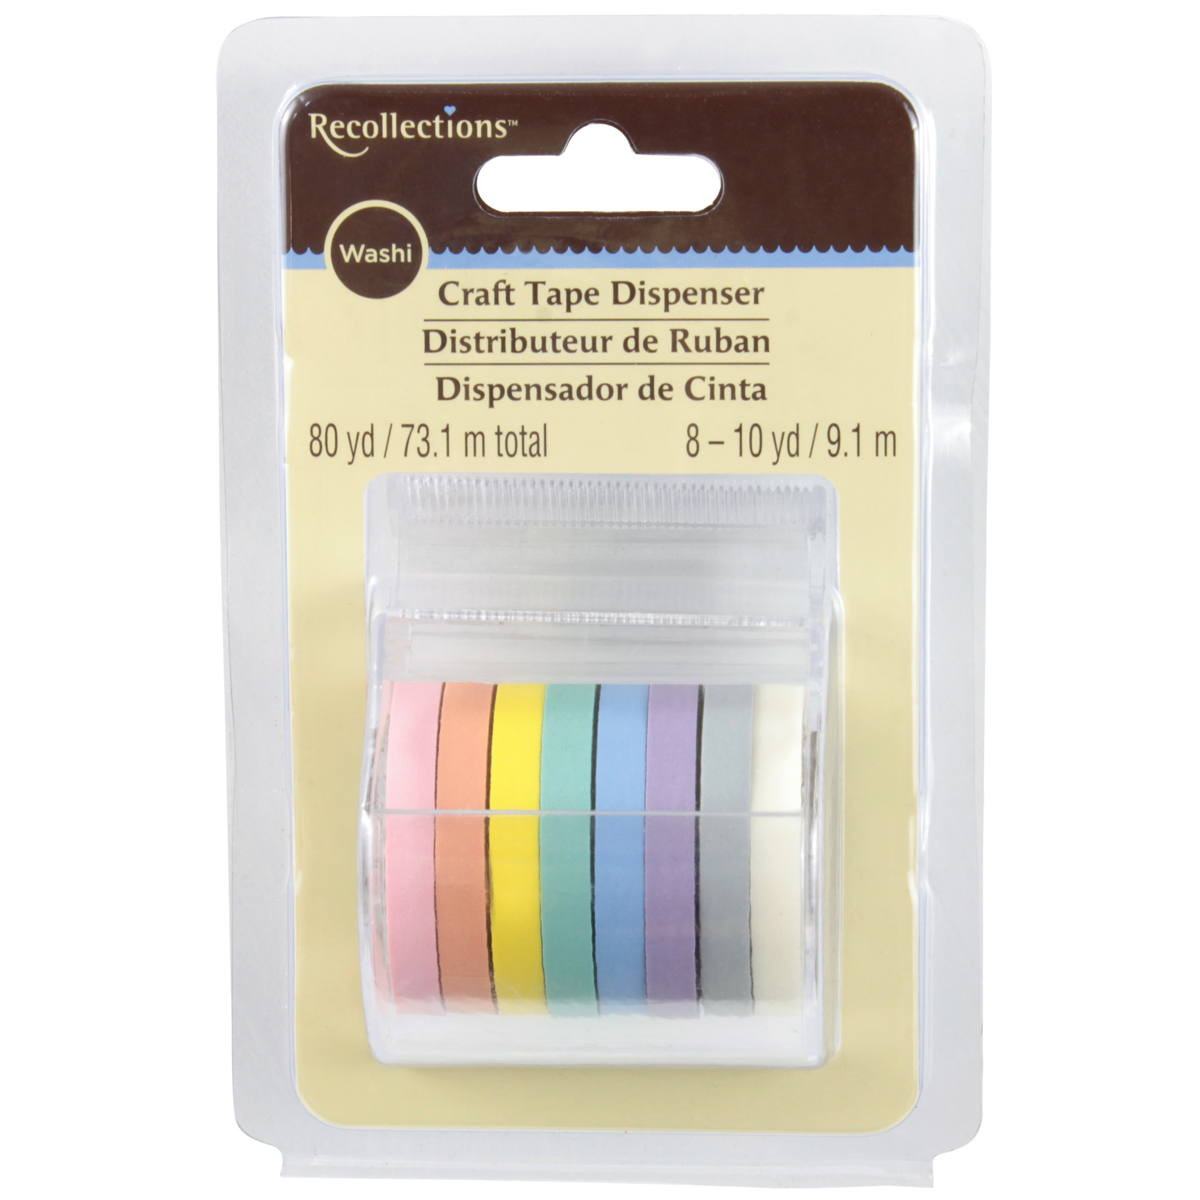 http://www.michaels.com/recollections-washi-tape-dispenser-pastels/10259661.html#q=recollections+washi&start=20